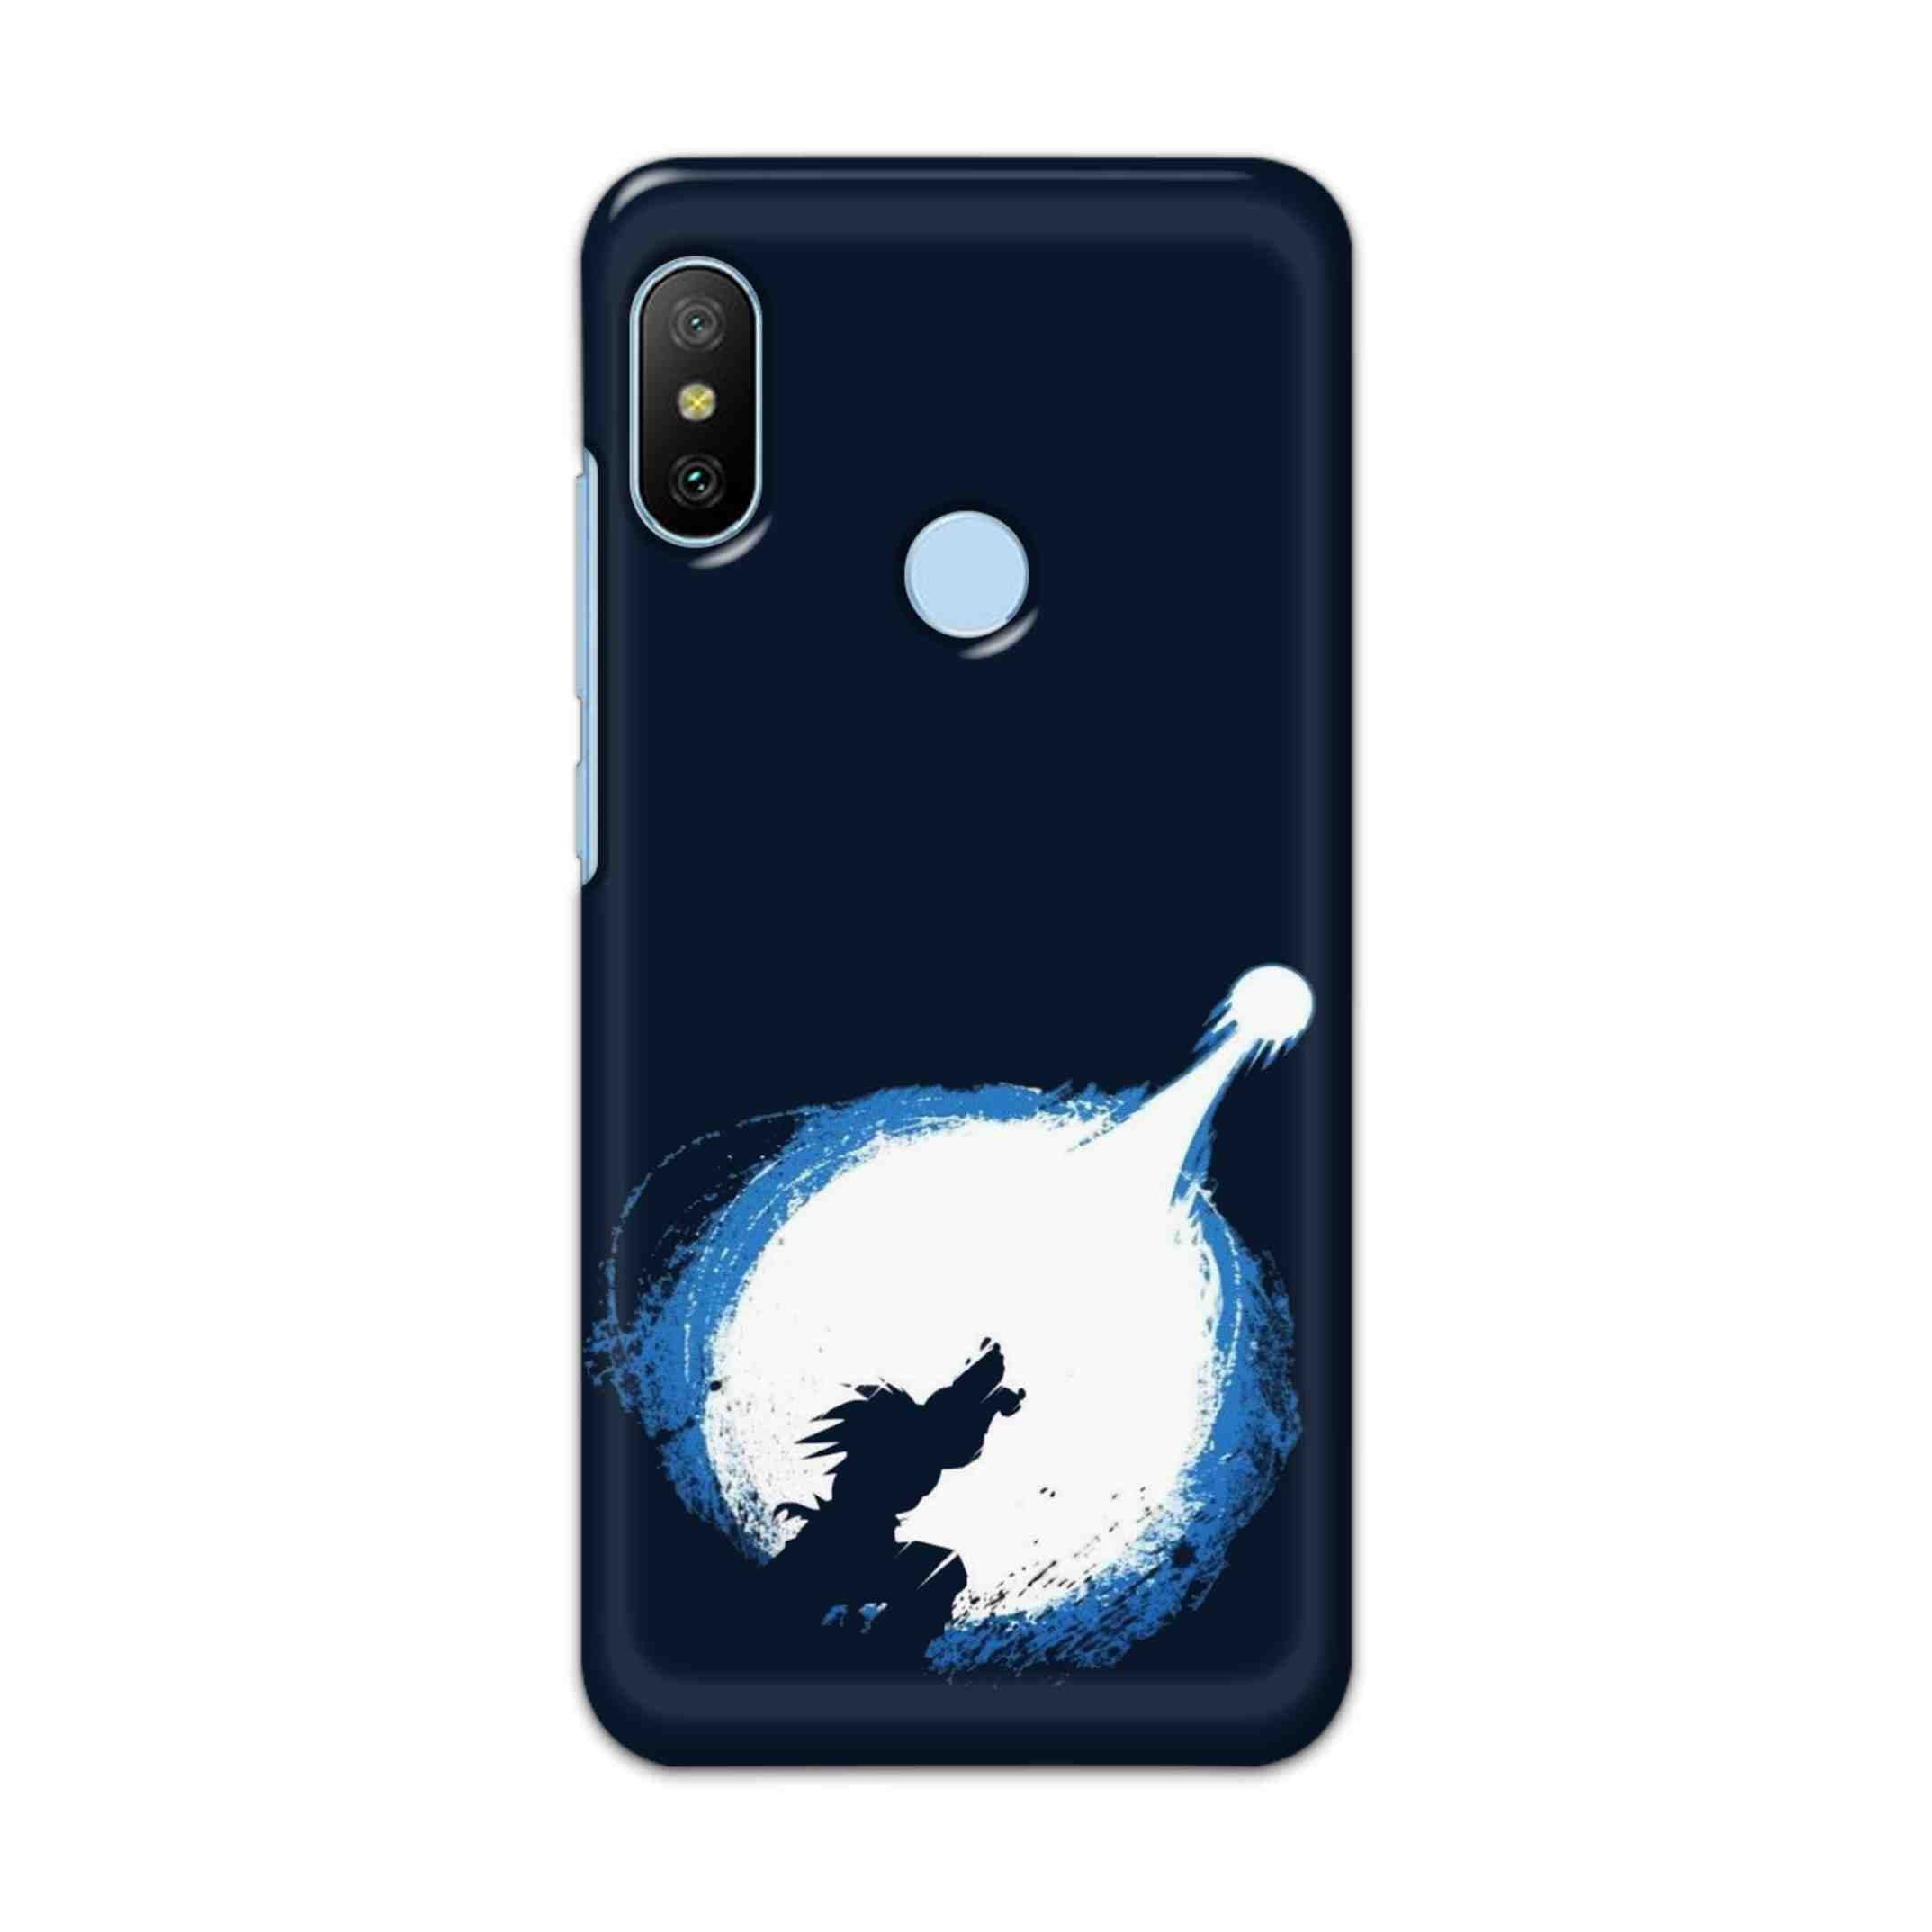 Buy Goku Power Hard Back Mobile Phone Case/Cover For Xiaomi Redmi 6 Pro Online